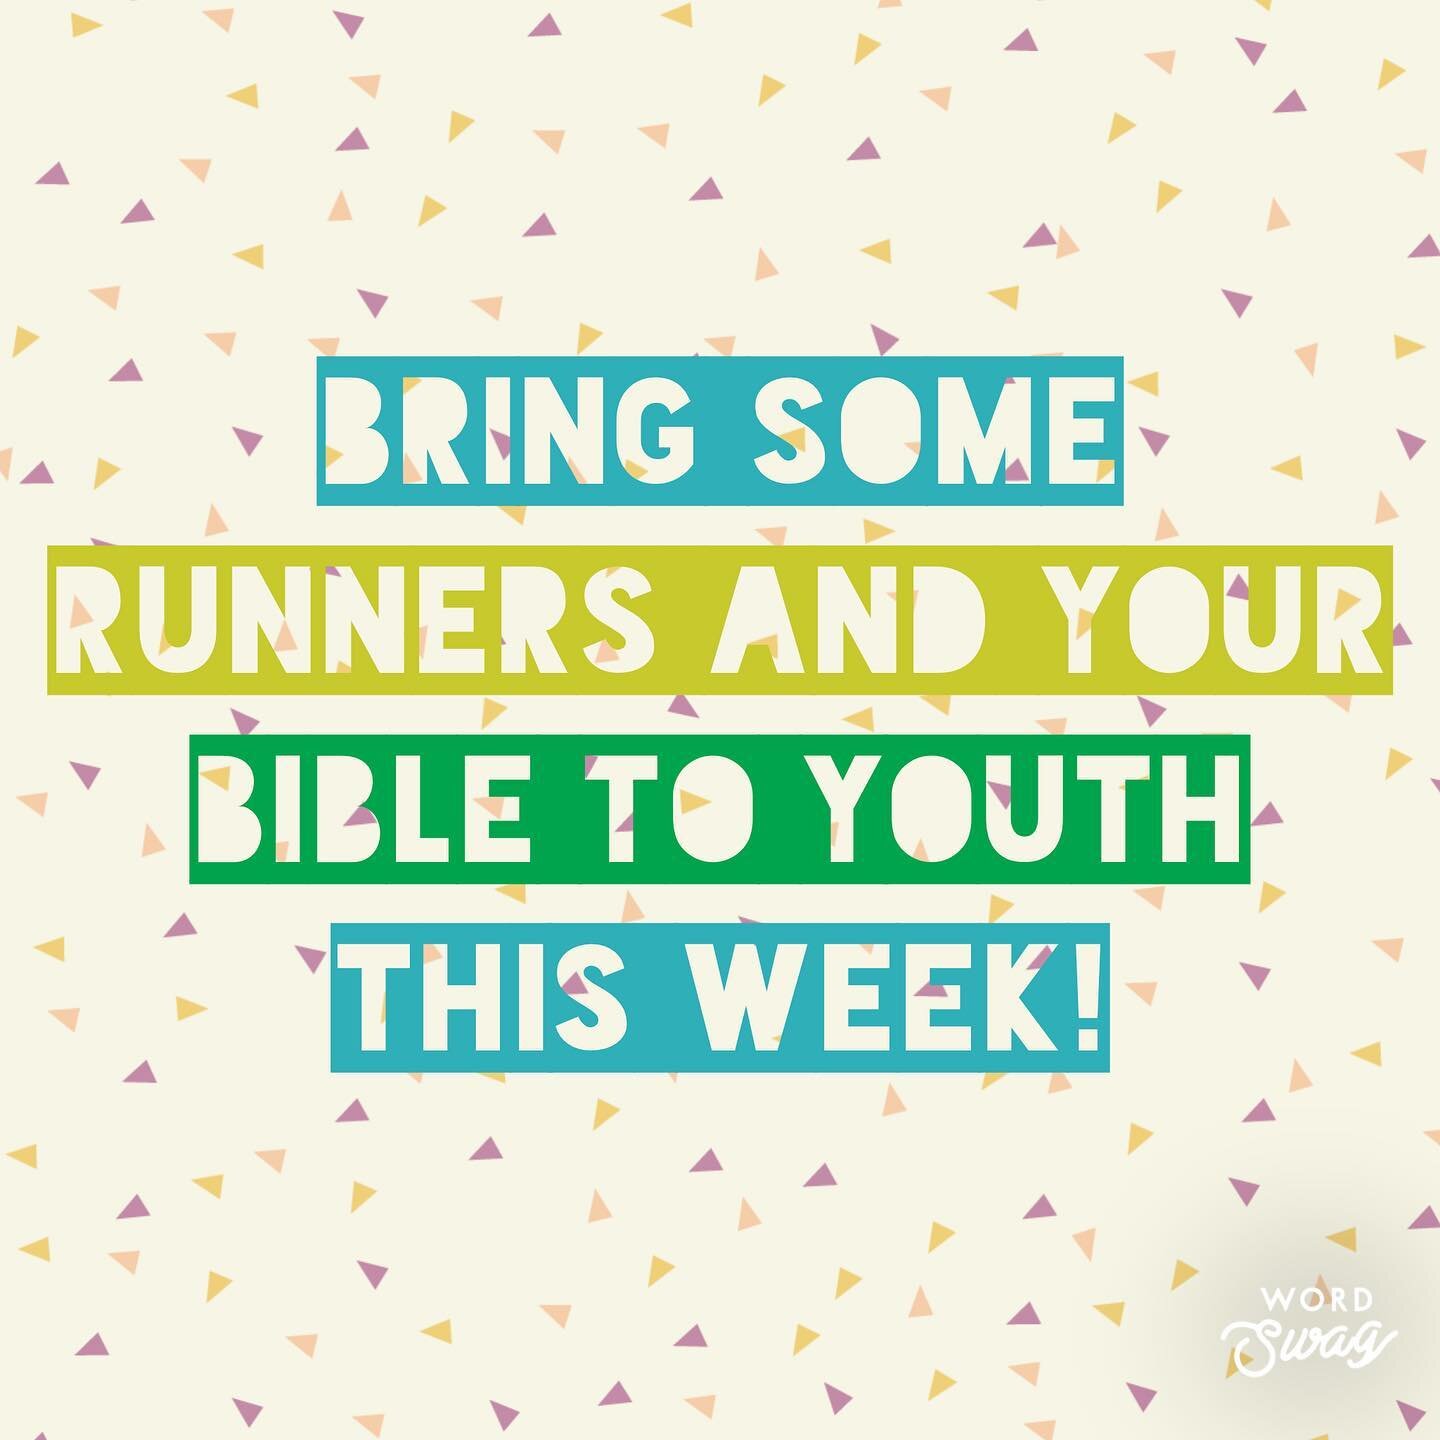 Sr Youth - Tuesday @ 7
Jr Youth - Thursday @ 7